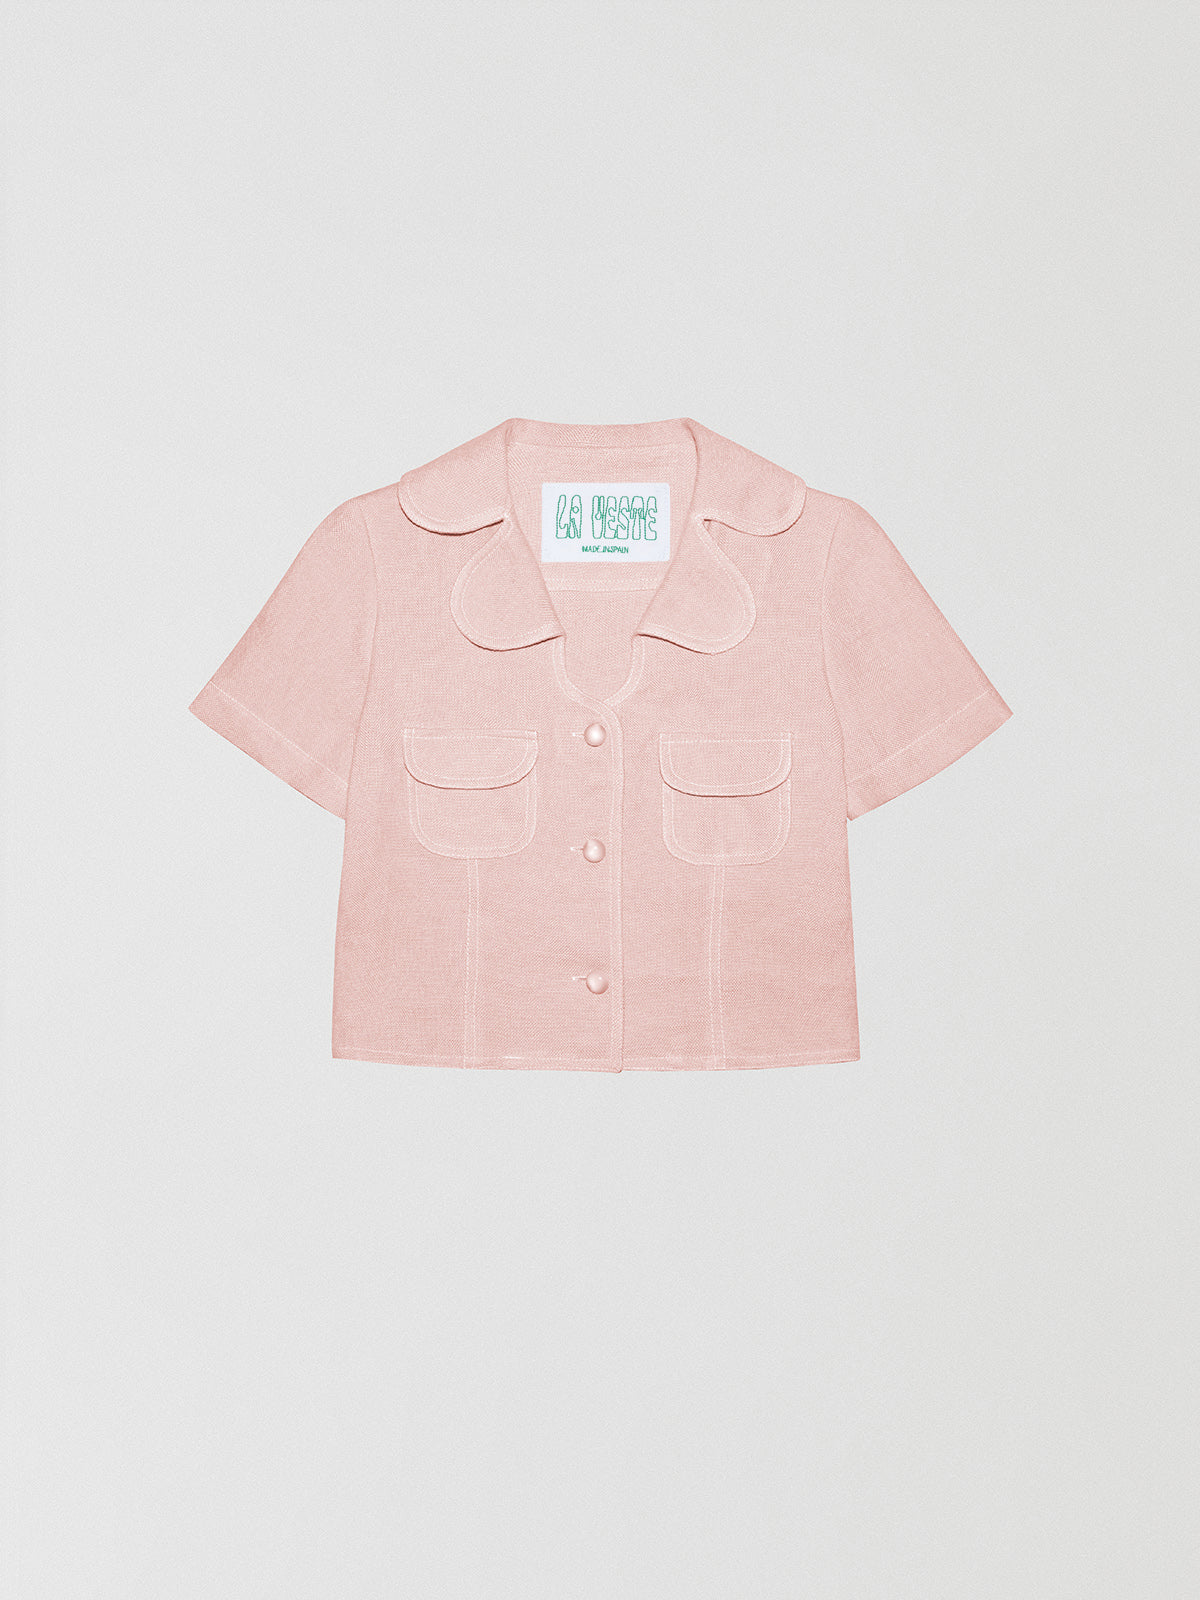 Loto Pink Shirt is a light pink linen shirt with front pockets and button closure in the same color.